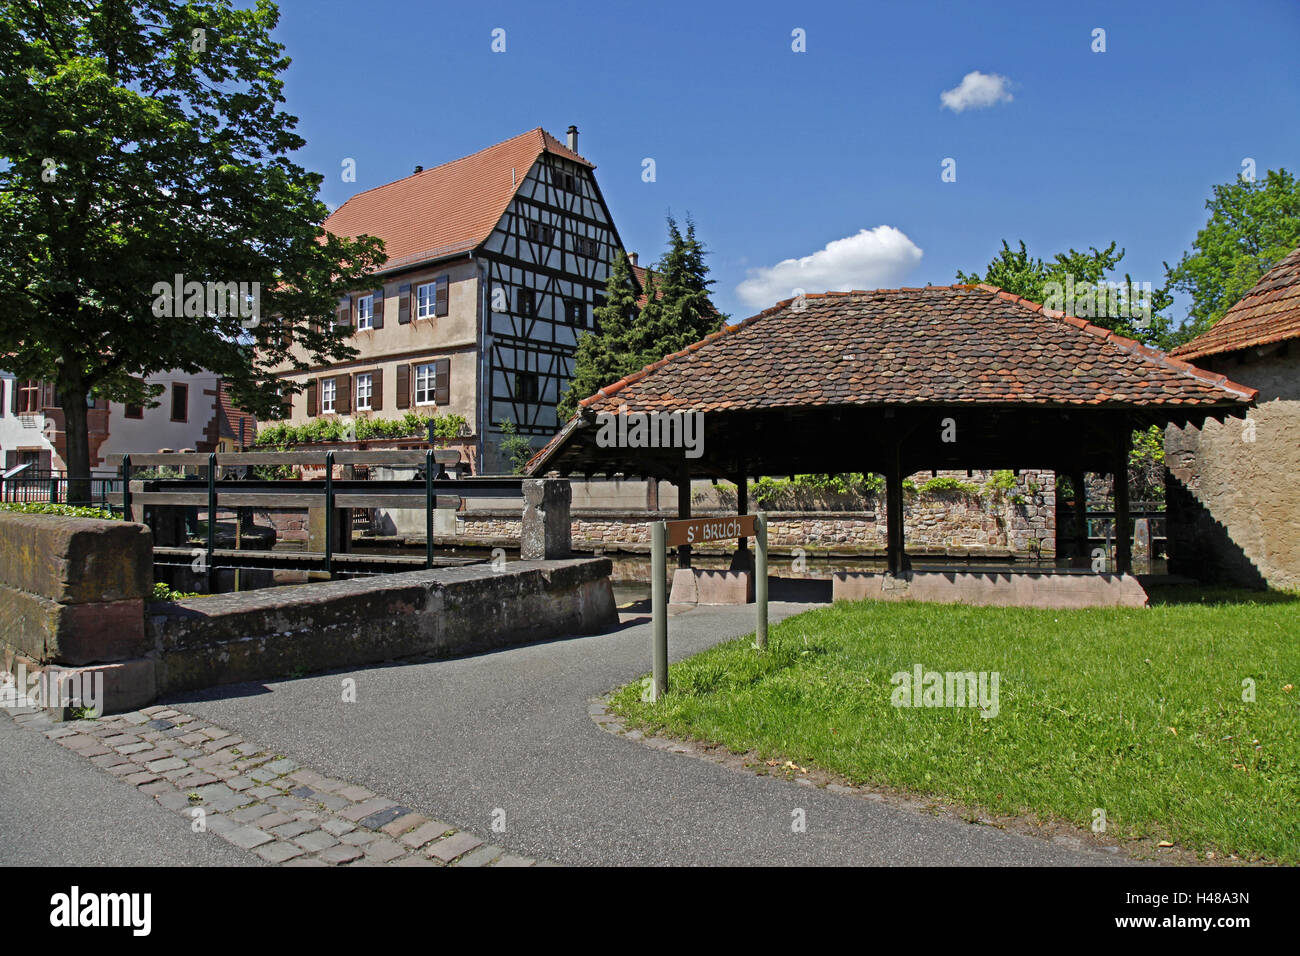 France, Alsace, Wissembourg, white castle, white castle, S'Bruch, part town rupture, rupture fourth, restaurant Caveau you Châtelet, river loud, water mirroring, half-timbered house, Stock Photo